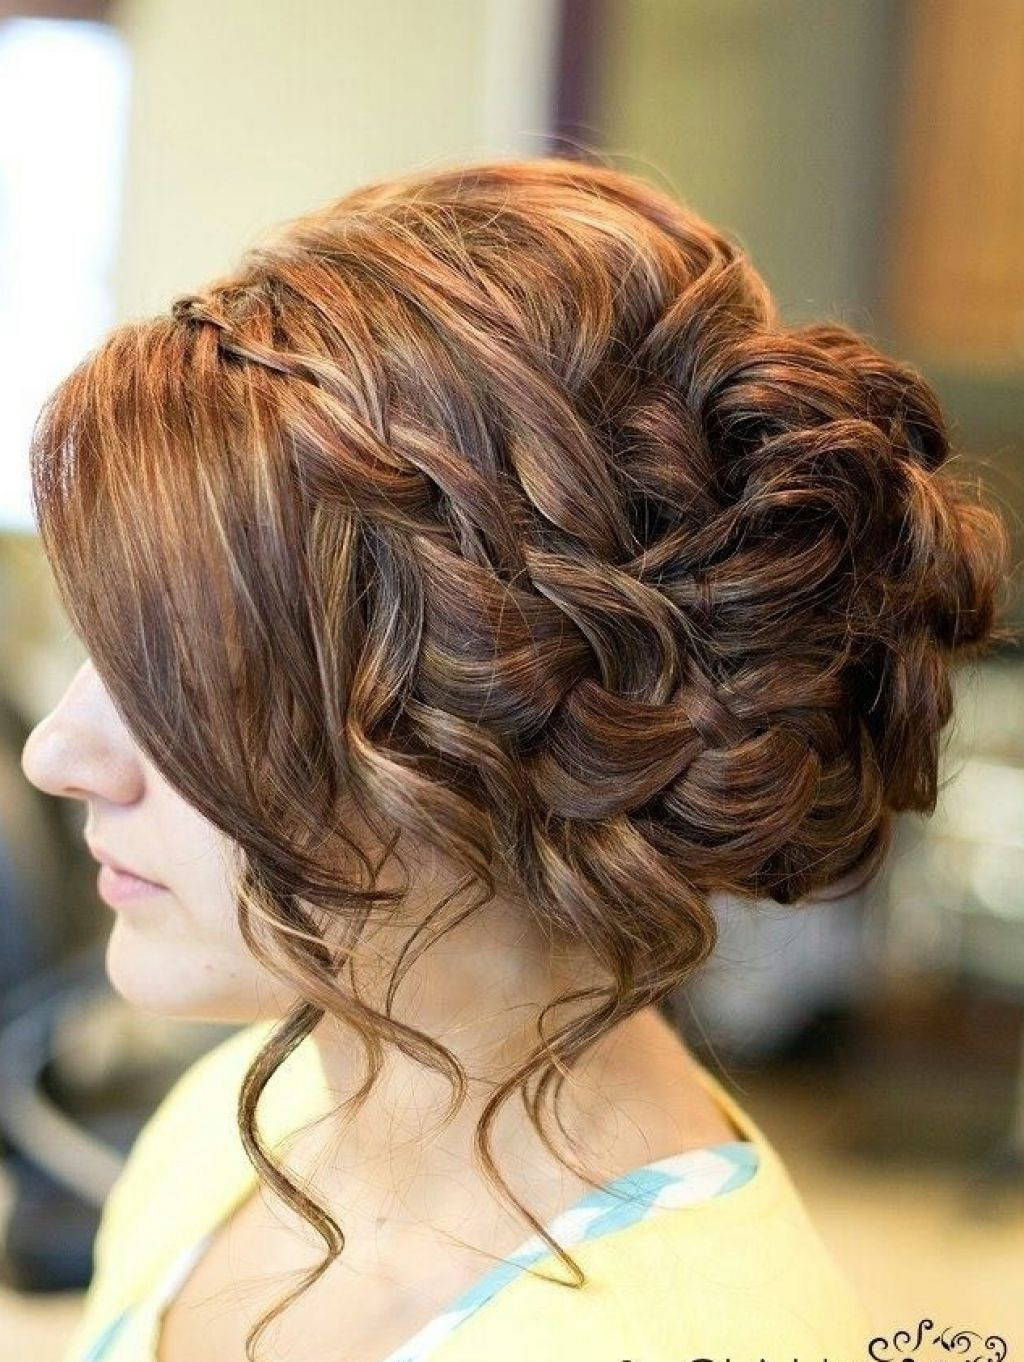 Prom Hairstyles Braided
 14 Prom Hairstyles For Long Hair That Are Simply Adorable